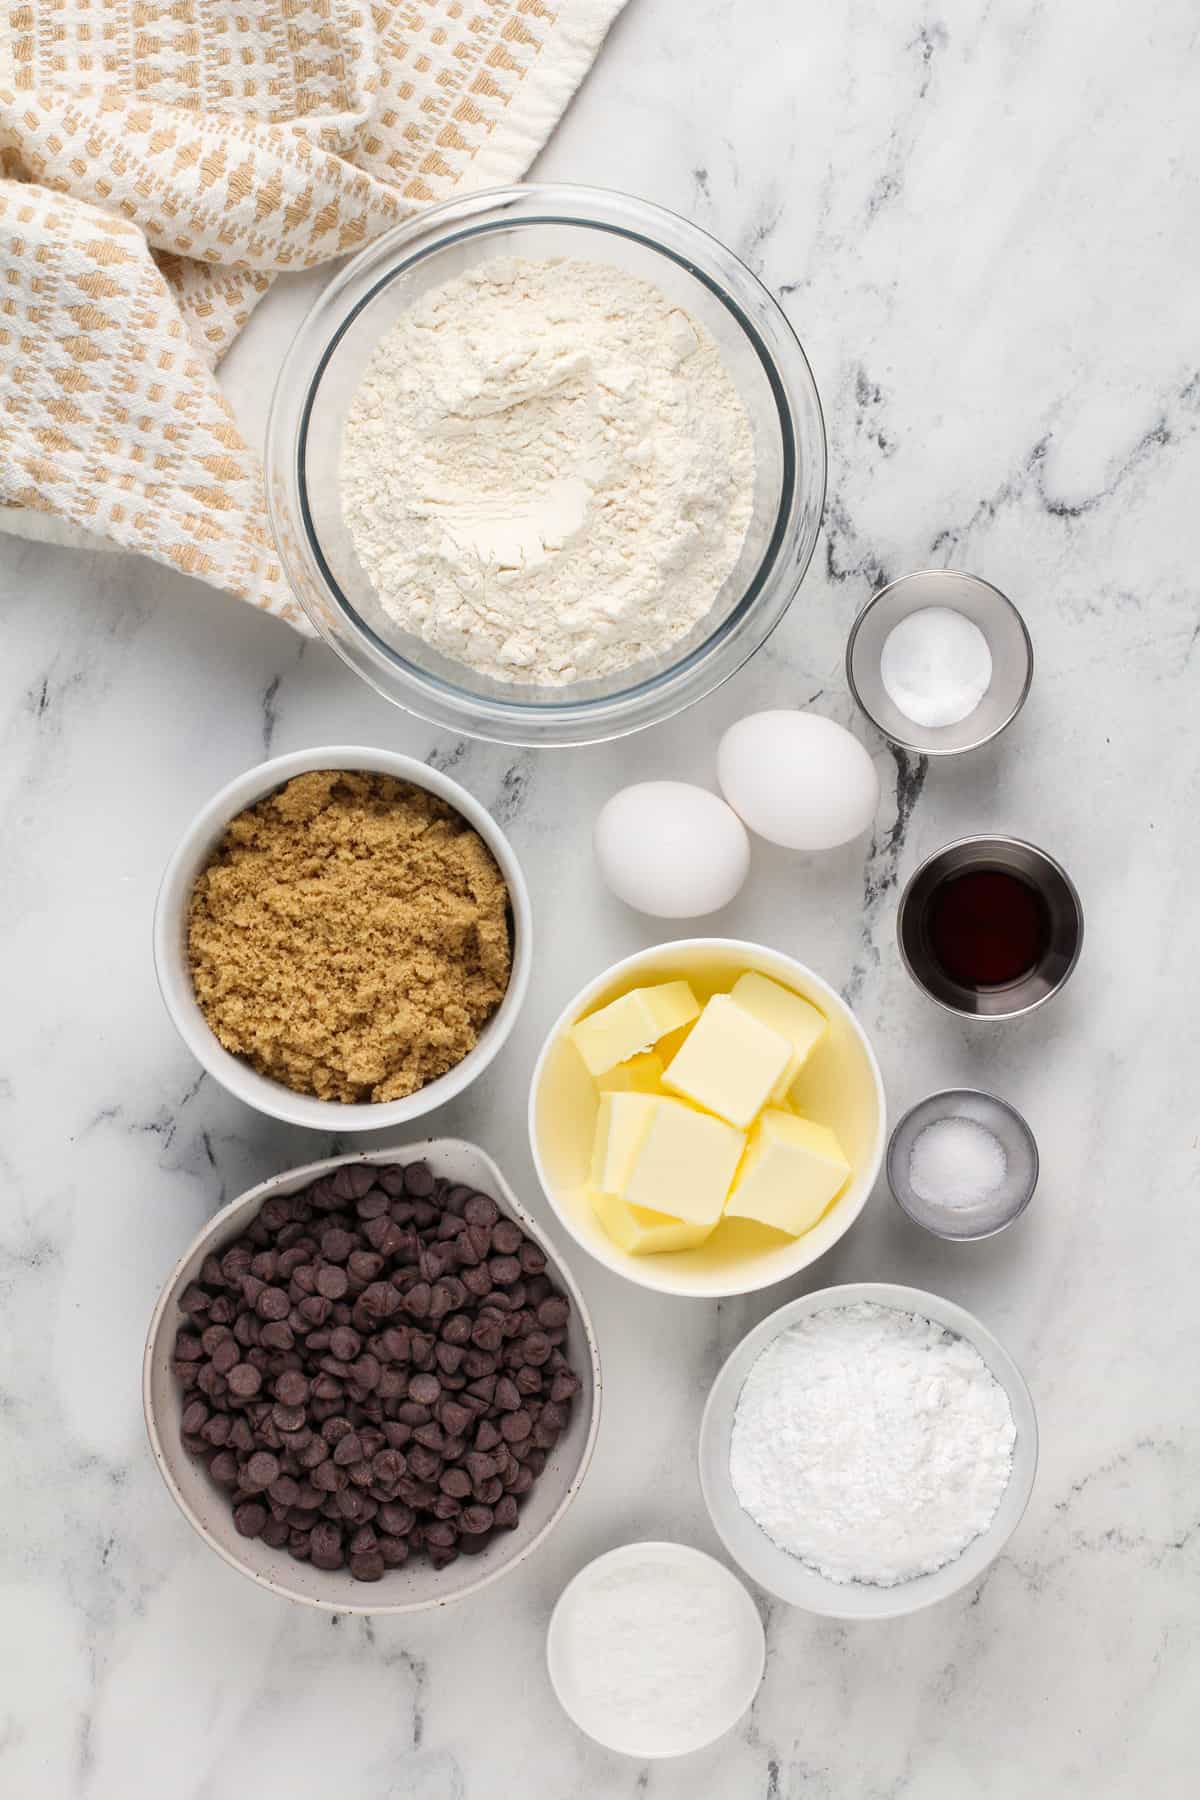 Ingredients for grand floridian chocolate chip cookies arranged on a marble countertop.